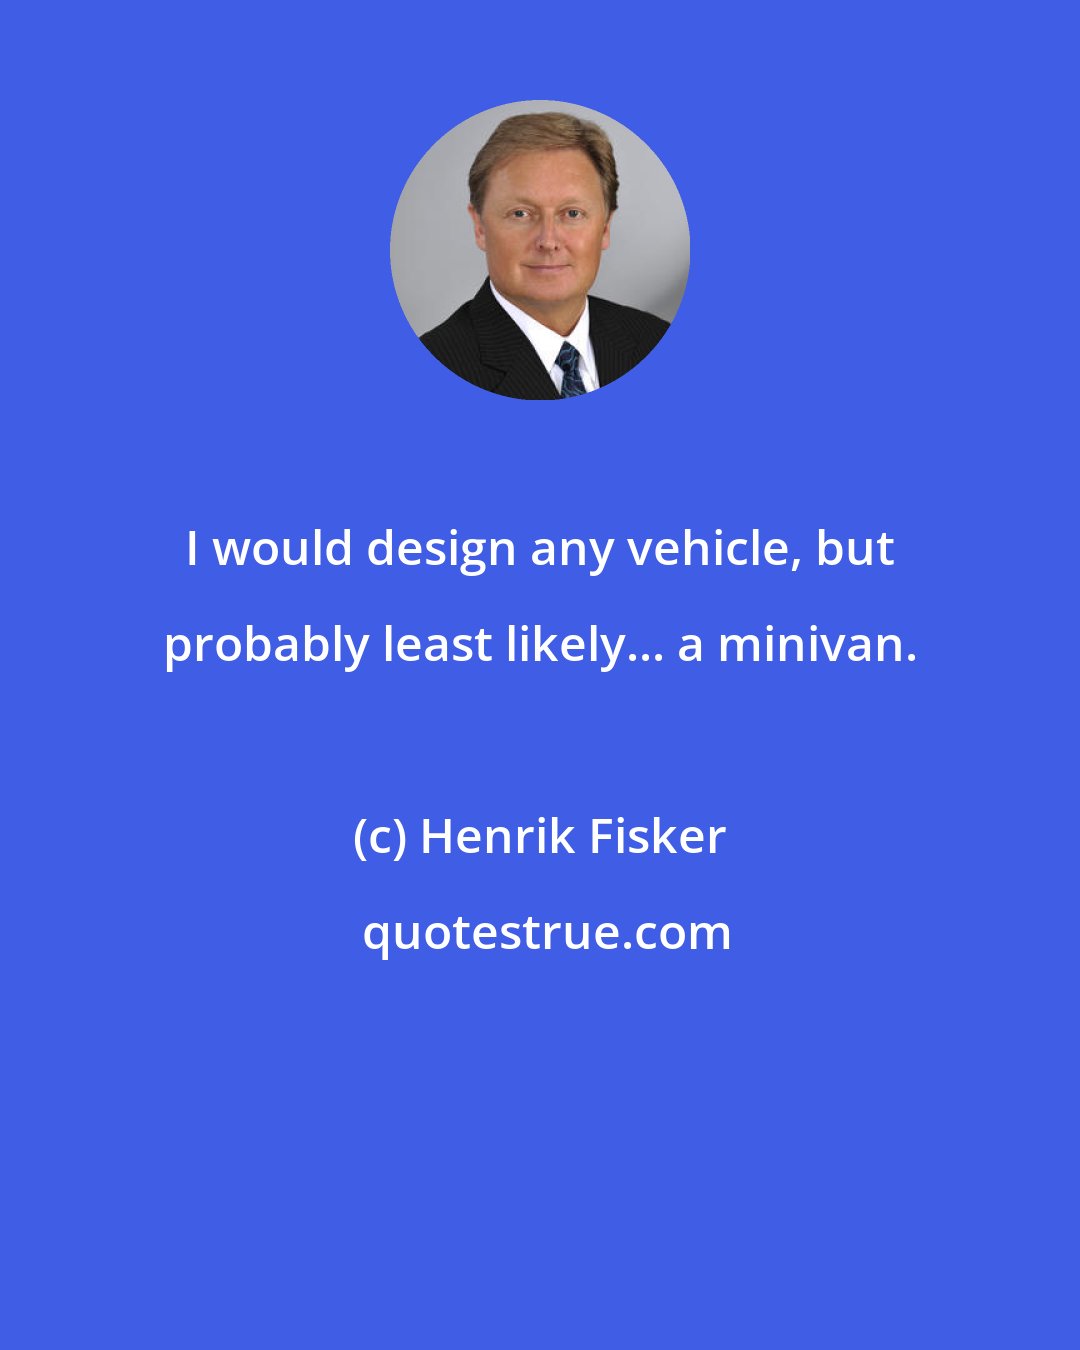 Henrik Fisker: I would design any vehicle, but probably least likely... a minivan.